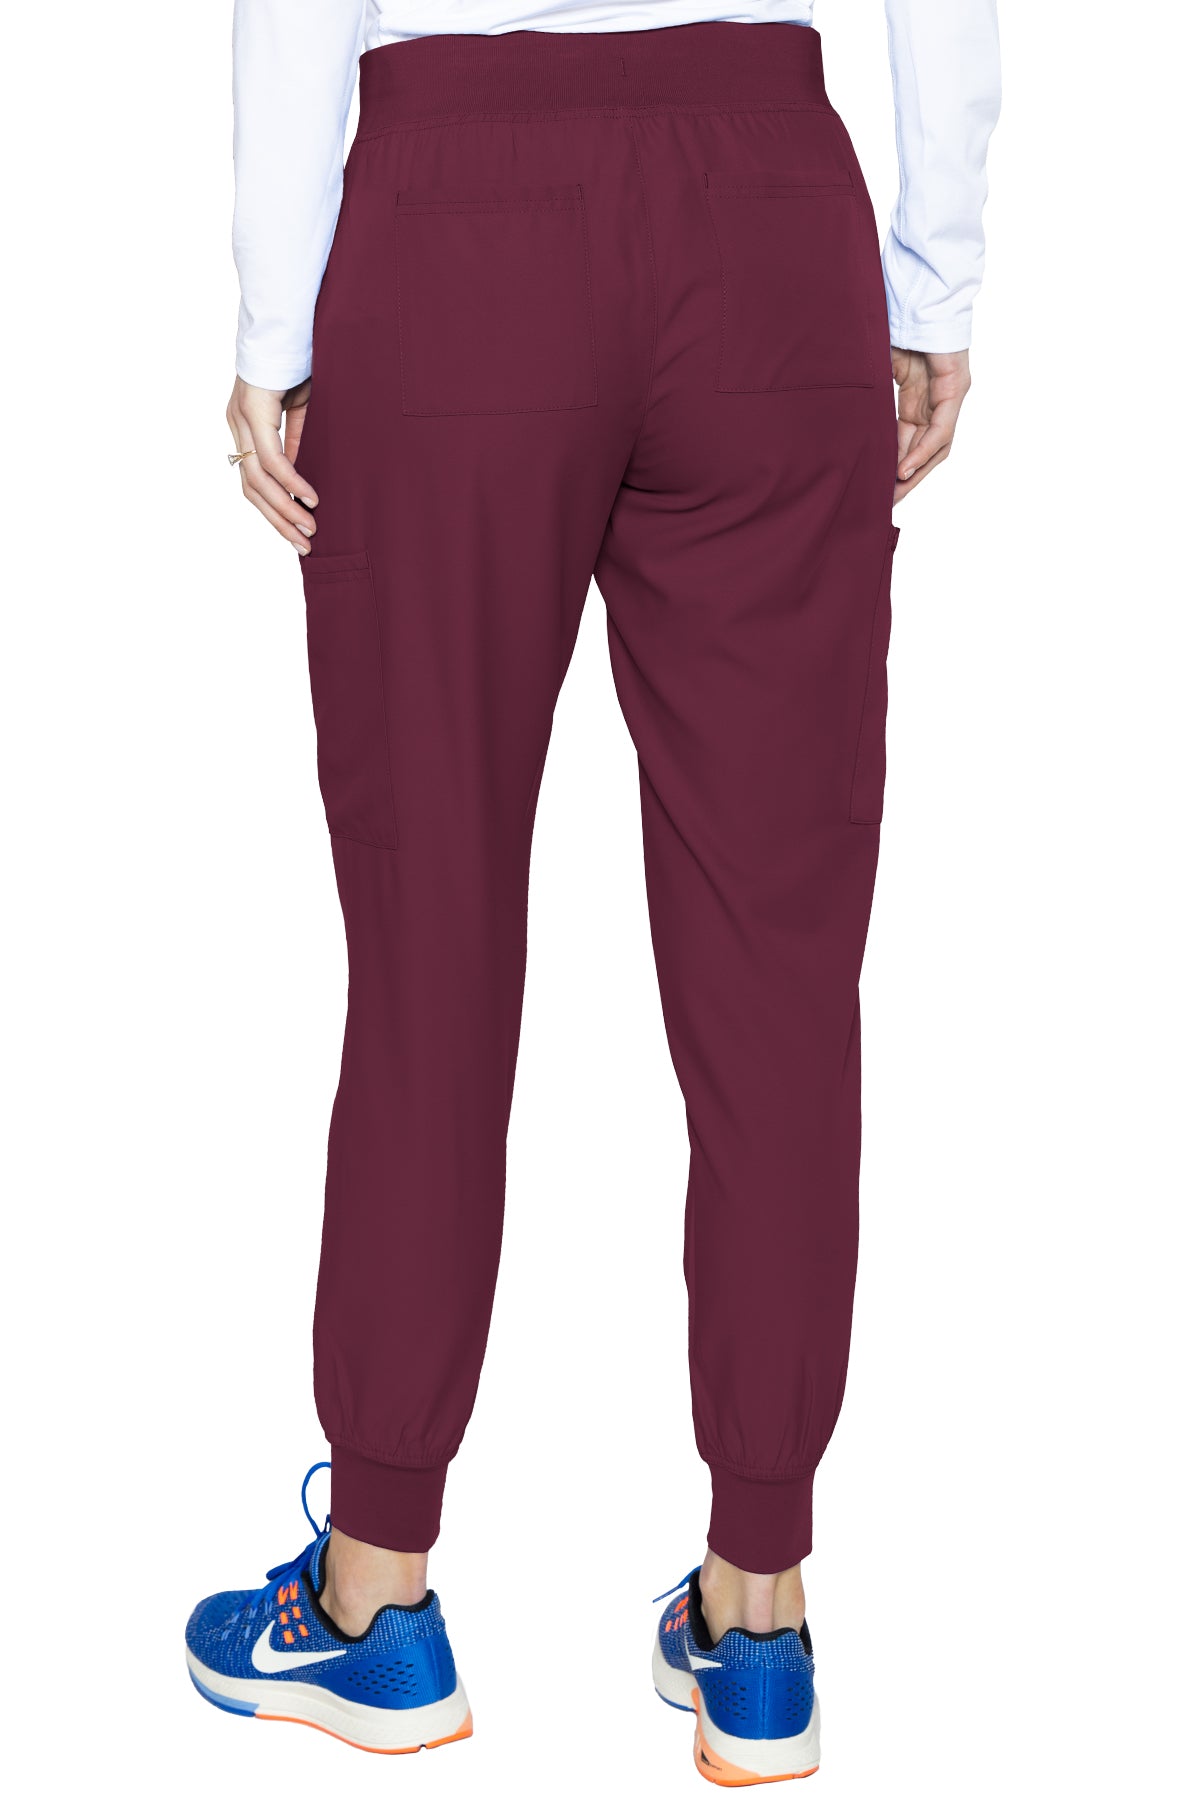 MED COUTURE ACTIVATE FLOW PANT MAROON WINE SCRUBS BOTTOMS PANTS